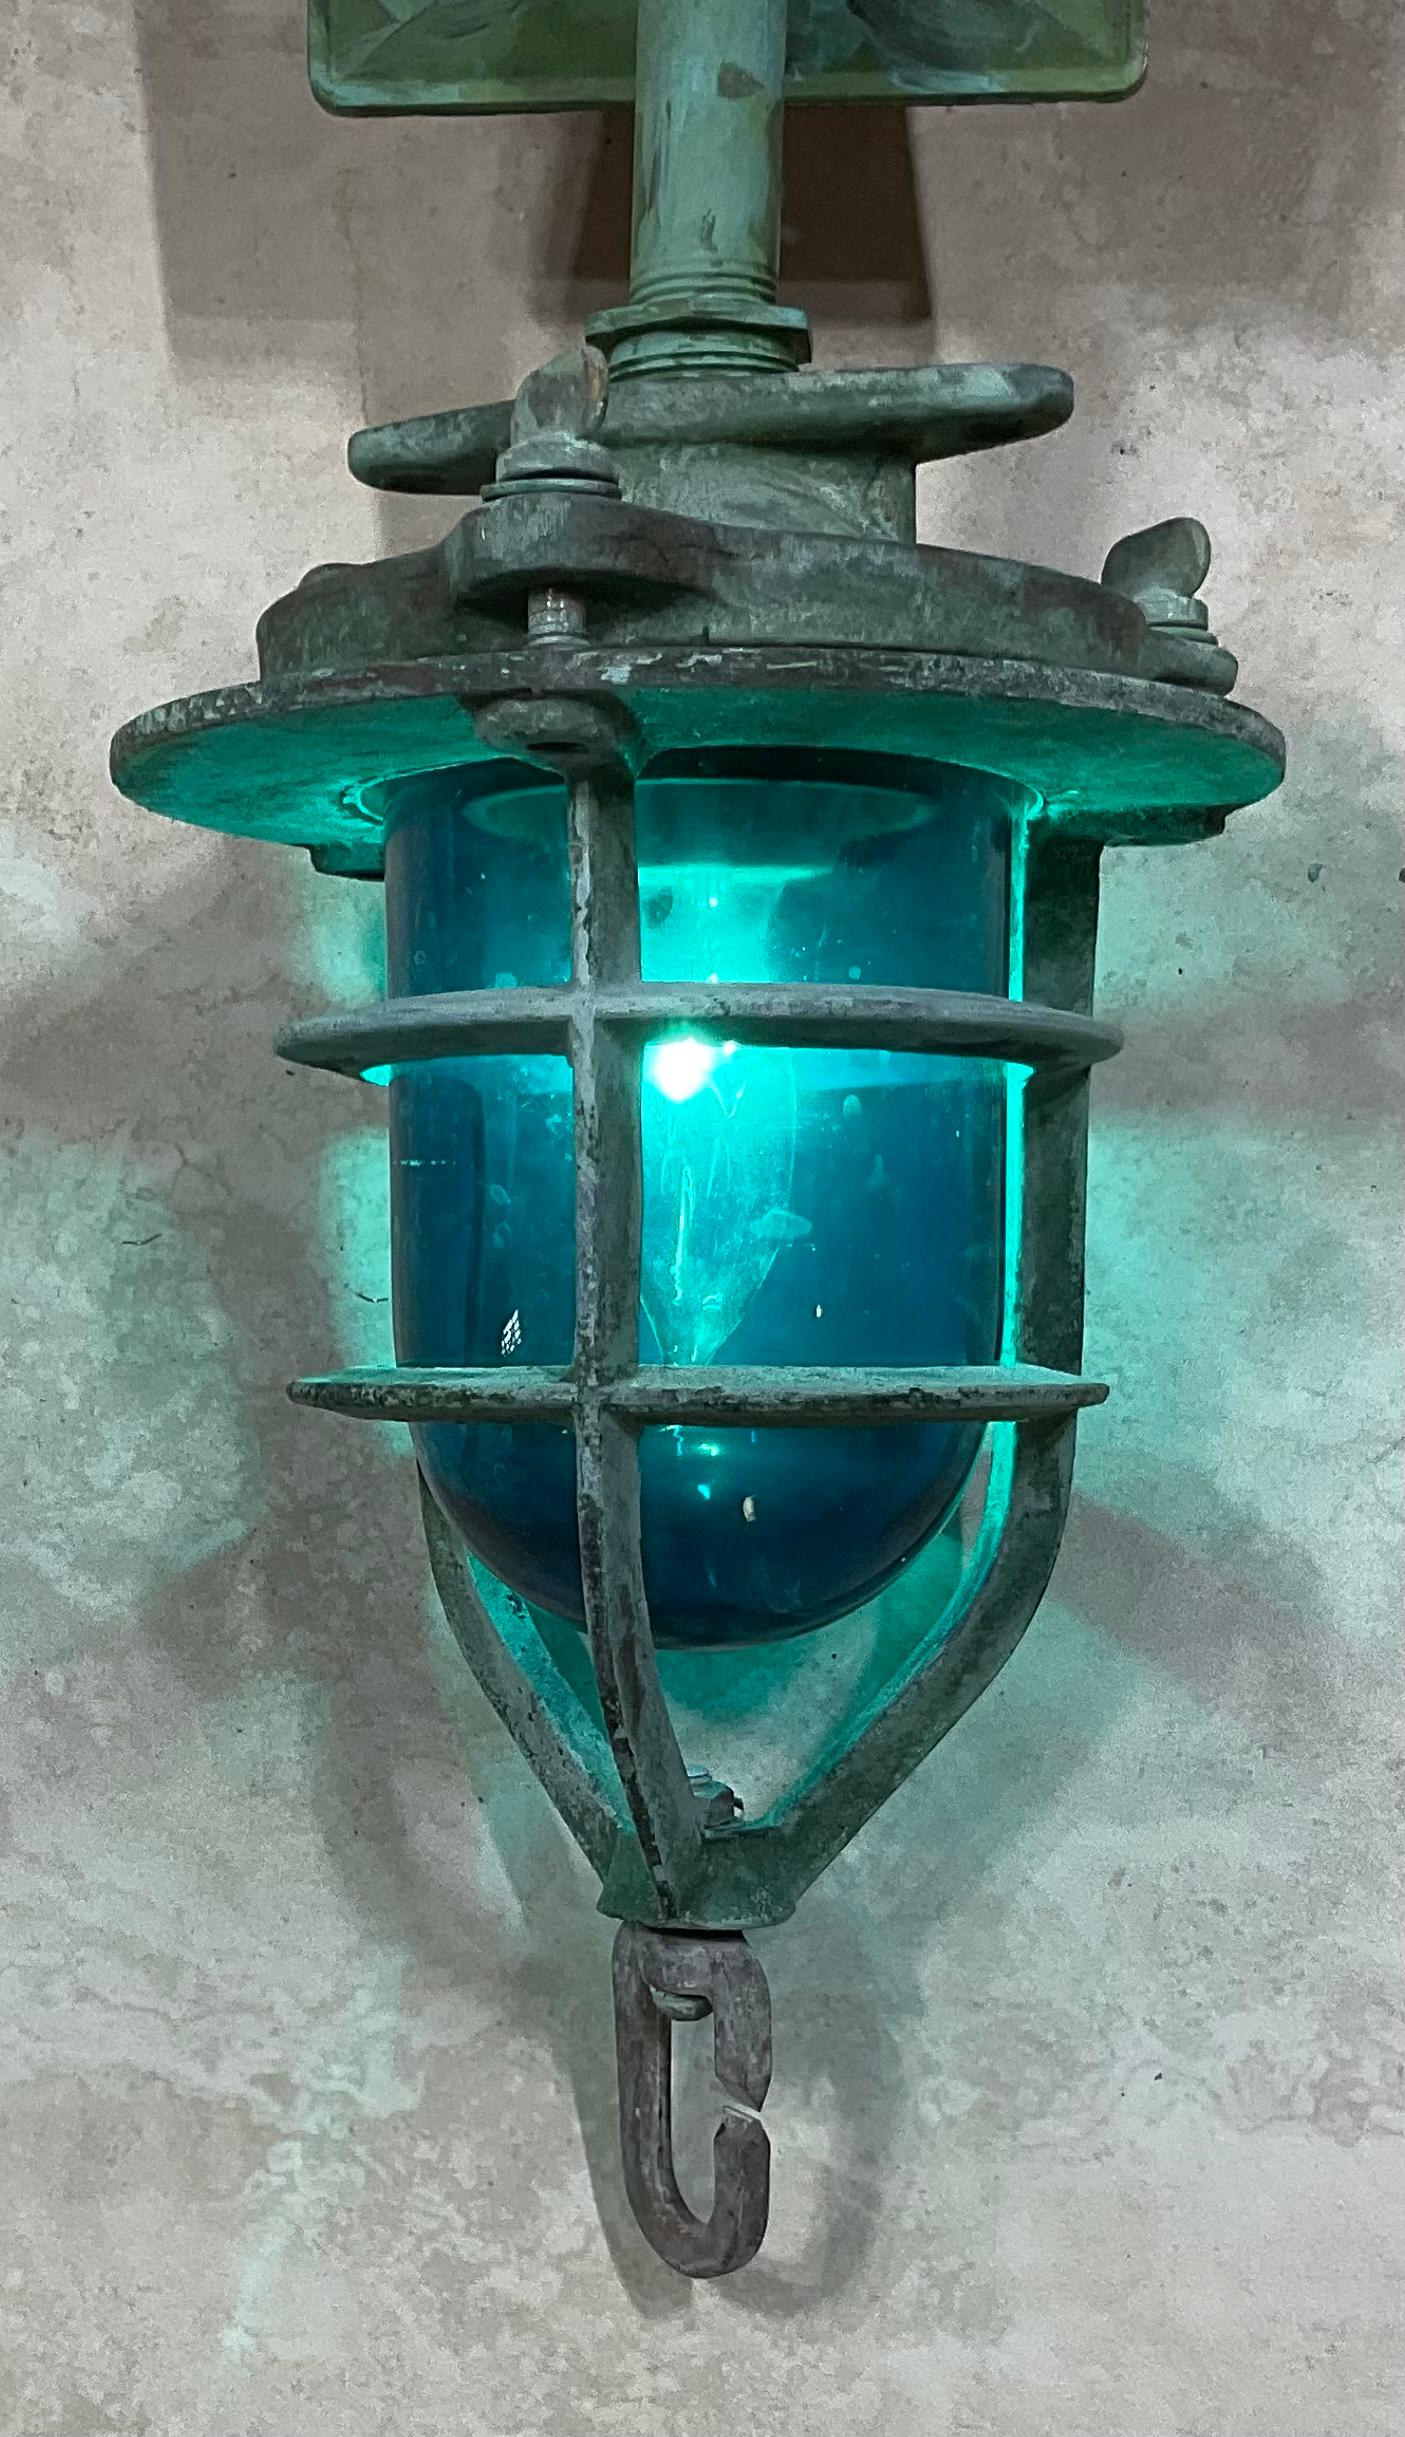 
Original marine convoy light from a ship , with blue glass light and protective original solid bronze cage . Porcelain socket for one 60/watt light.
Steel Backplate size 5” x3”